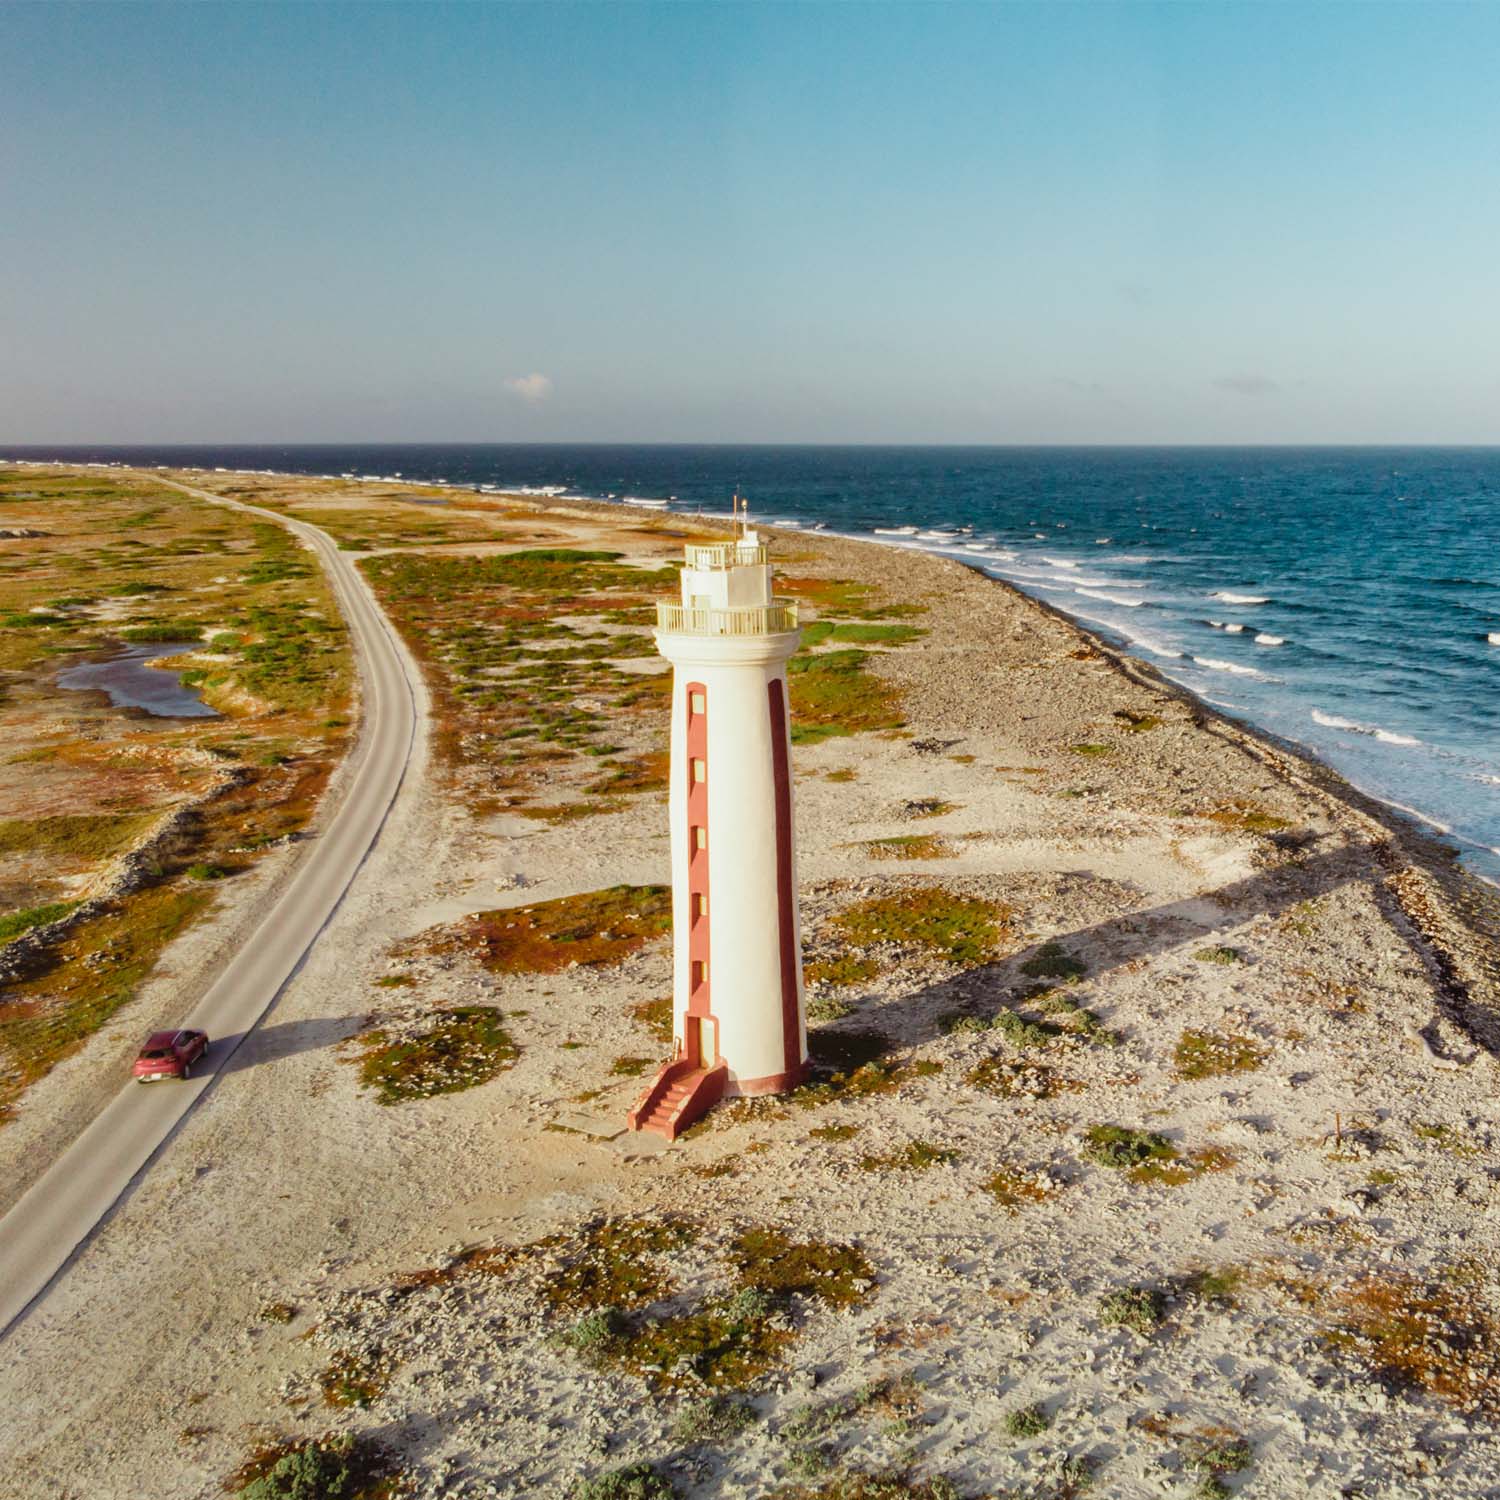 Aerial view of lighthouse on island coast